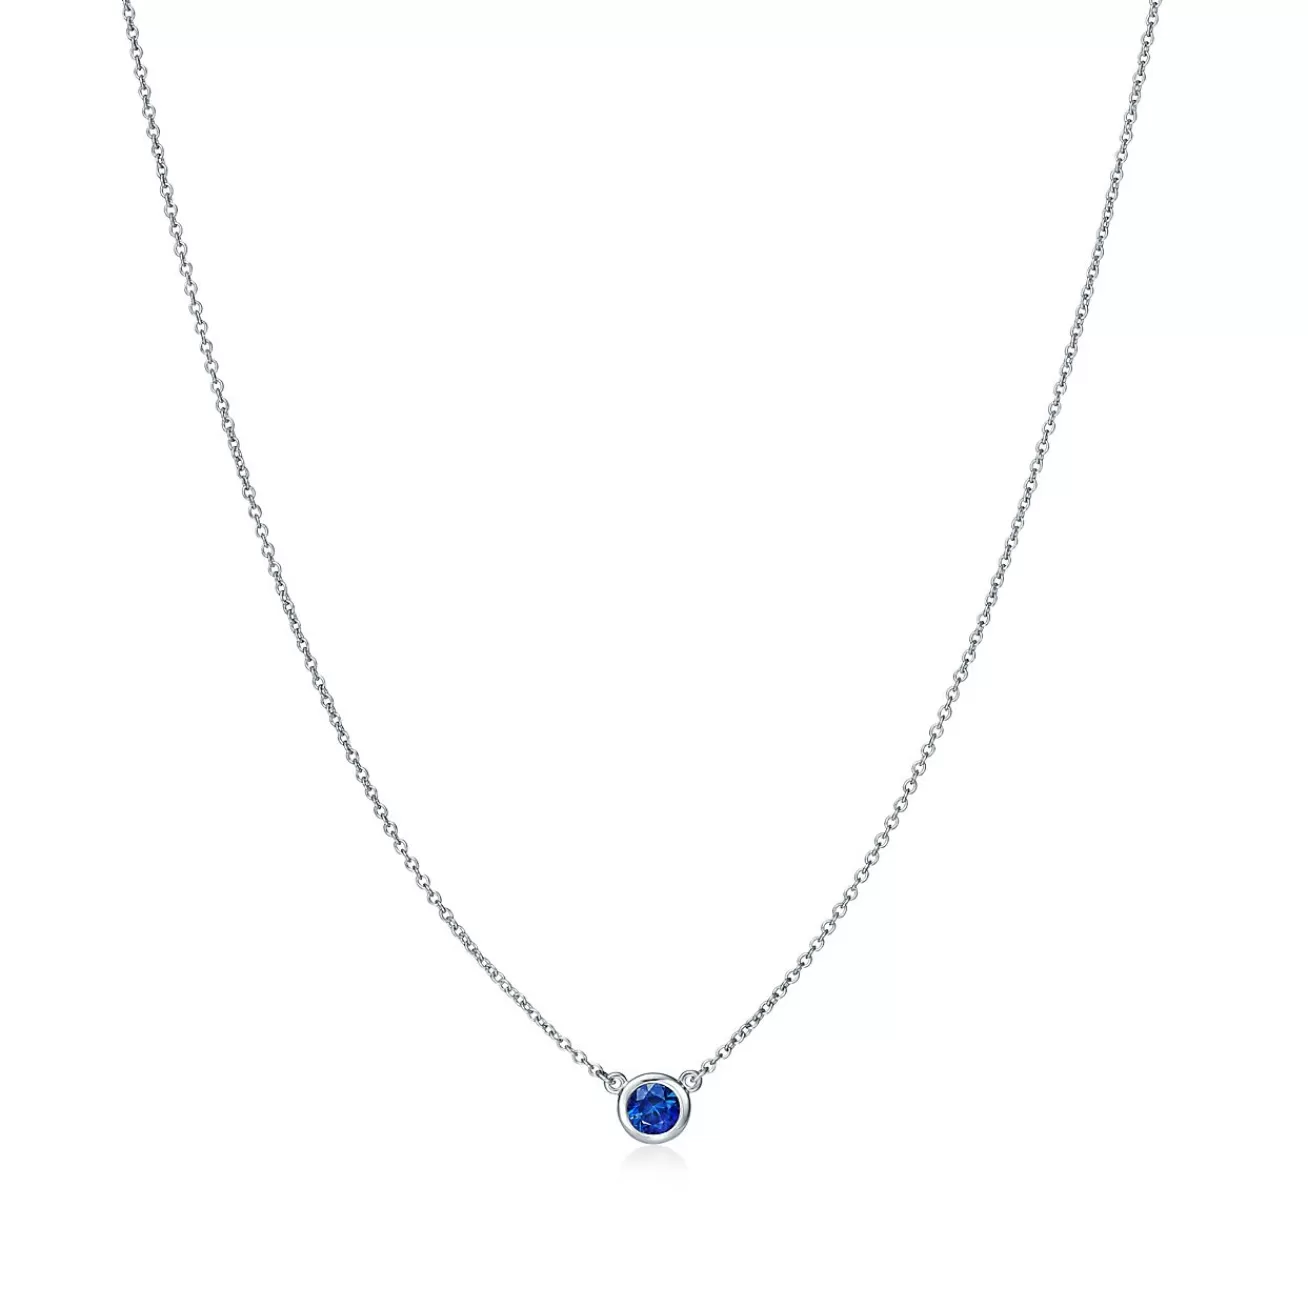 Tiffany & Co. Elsa Peretti® Color by the Yard Pendant in Platinum with a Sapphire | ^ Necklaces & Pendants | Dainty Jewelry